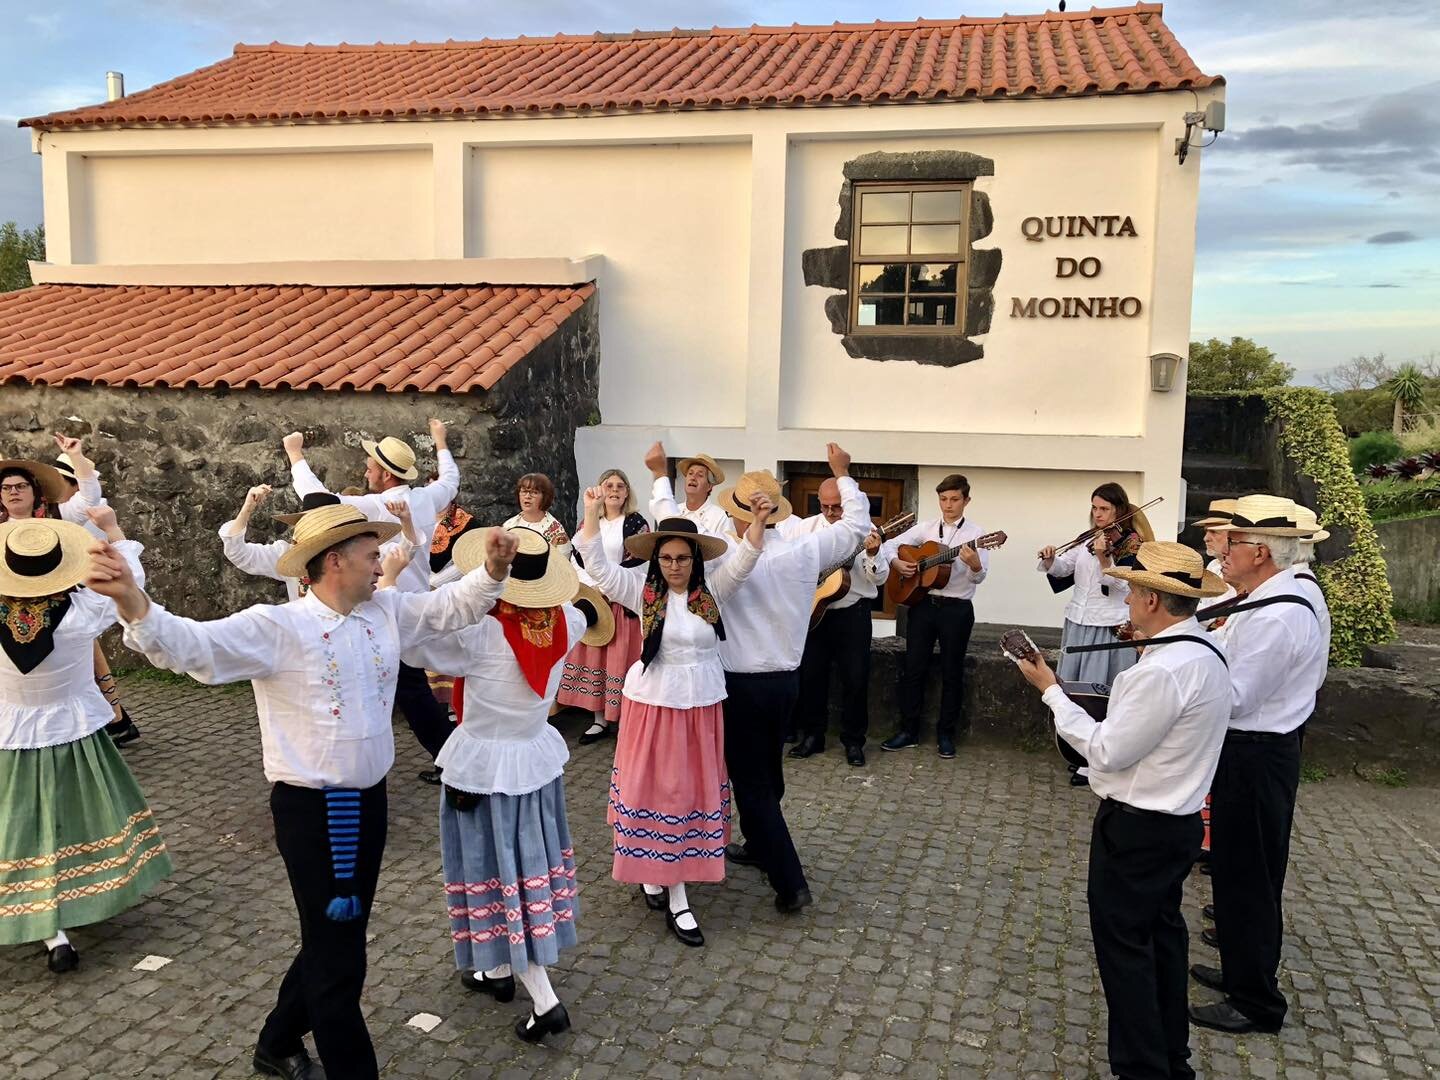 CHAMARRITA AT P&Aacute;TIO 

Another wonderful evening at P&Aacute;TIO with amazing guests and the &ldquo;Grupo Folcl&oacute;rico de Sal&atilde;o&rdquo; showing and teaching Chamarrita Dance. 🤩